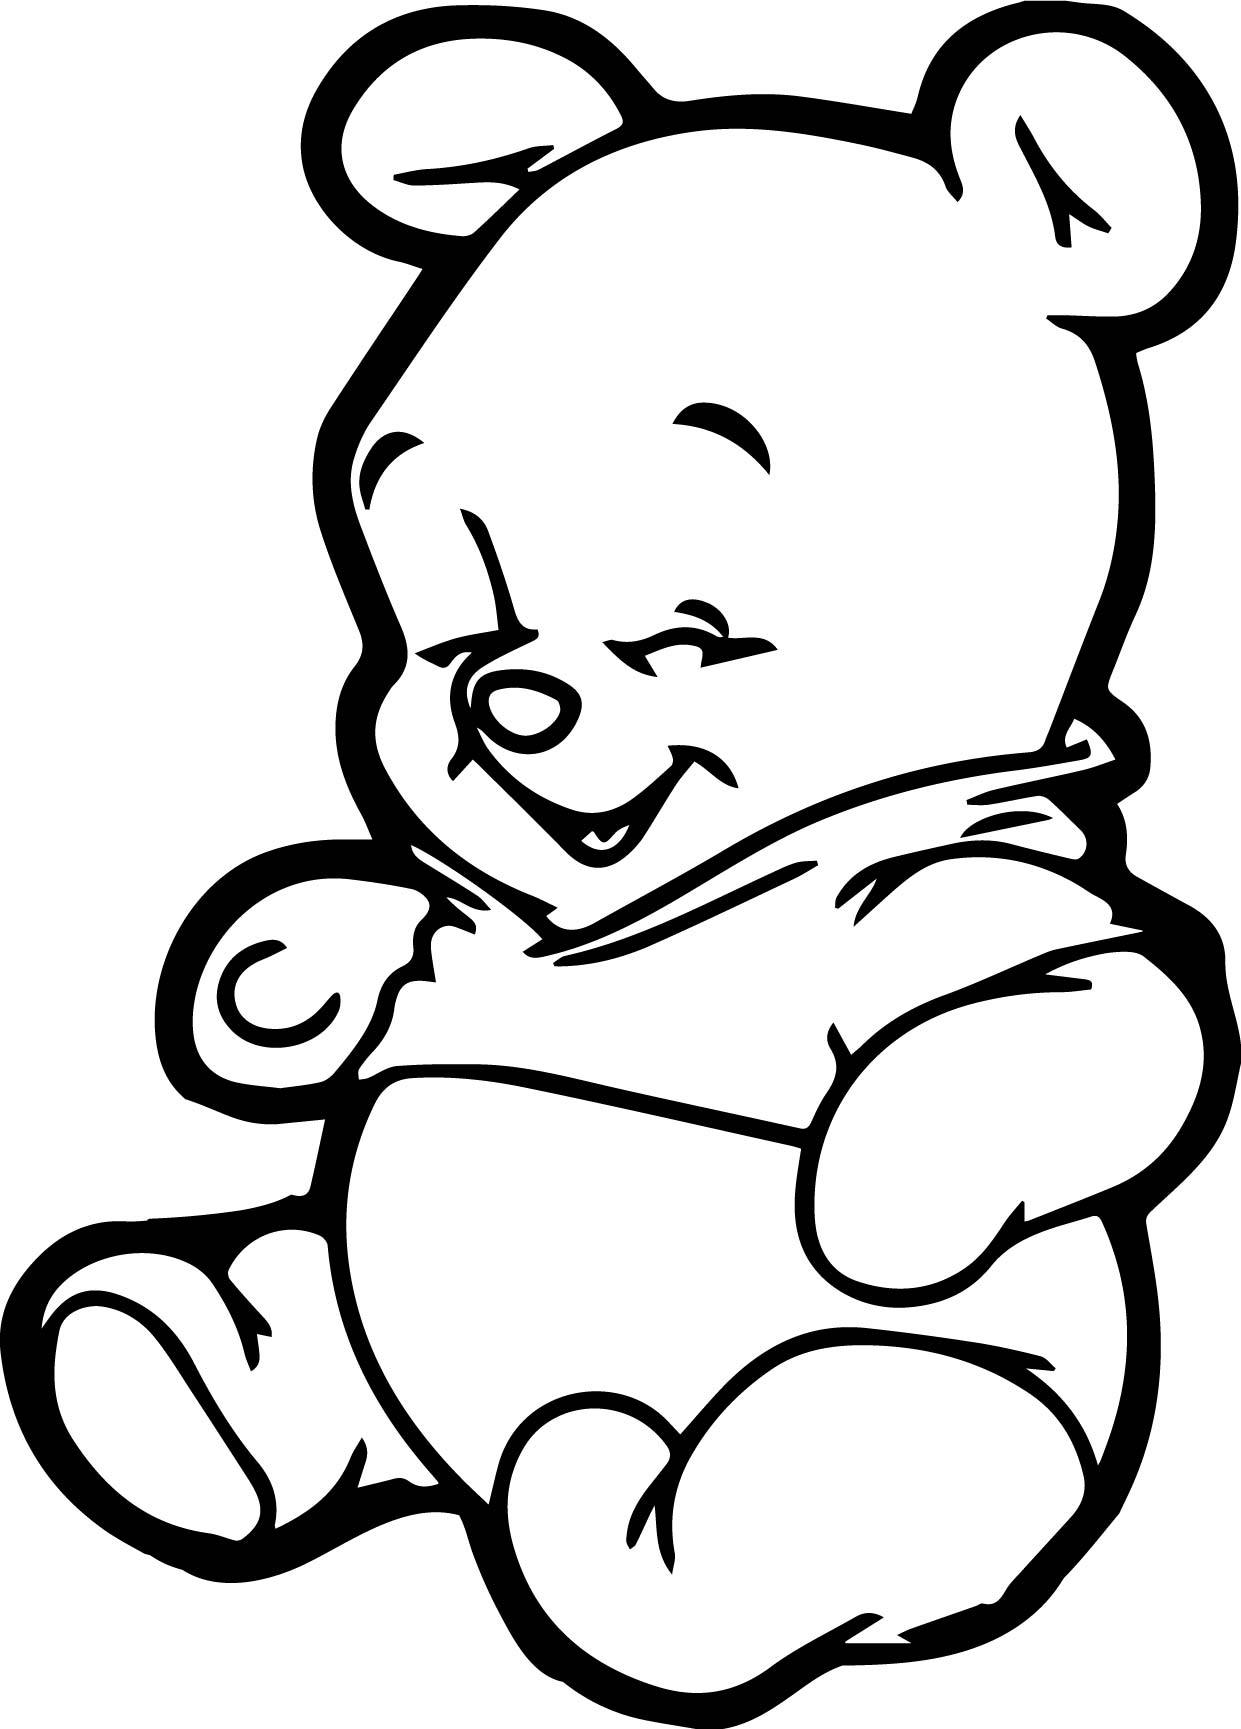 Winnie The Pooh Drawings | Free download on ClipArtMag